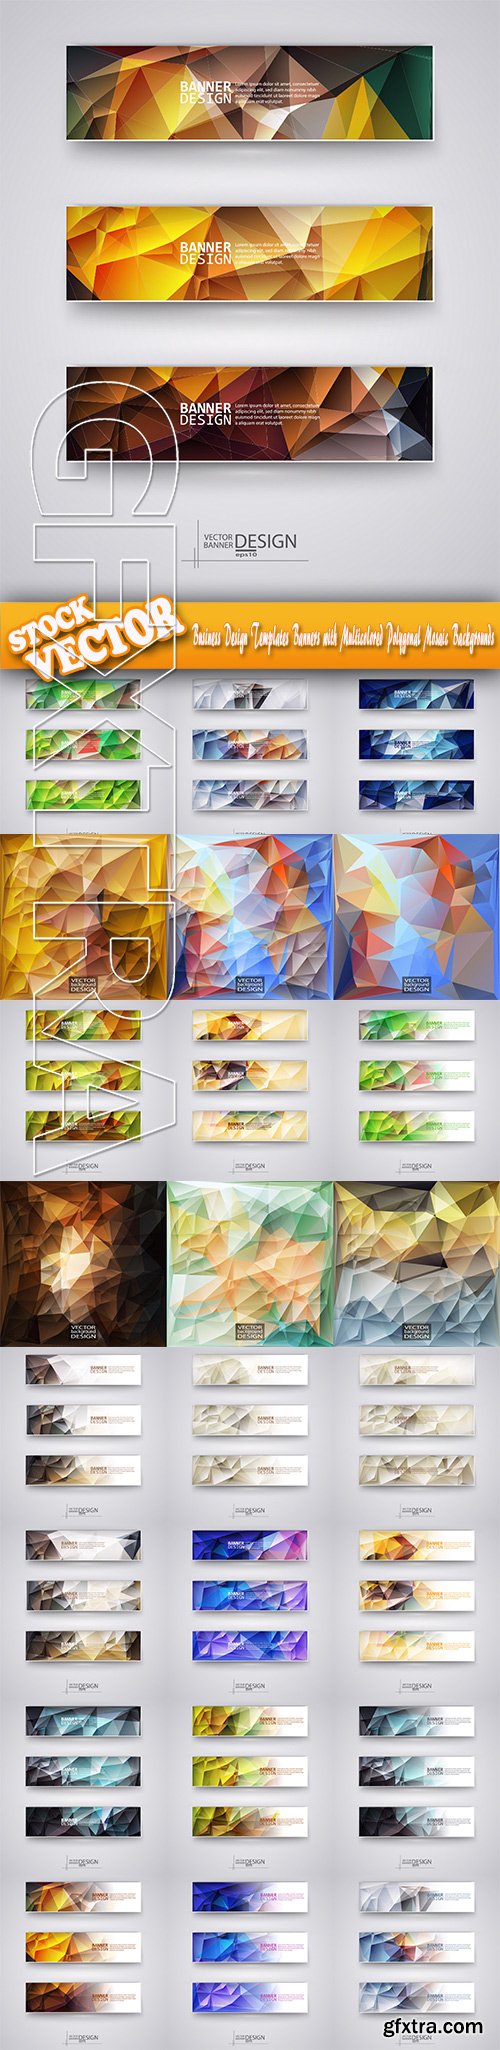 Stock Vector - Business Design Templates Banners with Multicolored Polygonal Mosaic Backgrounds